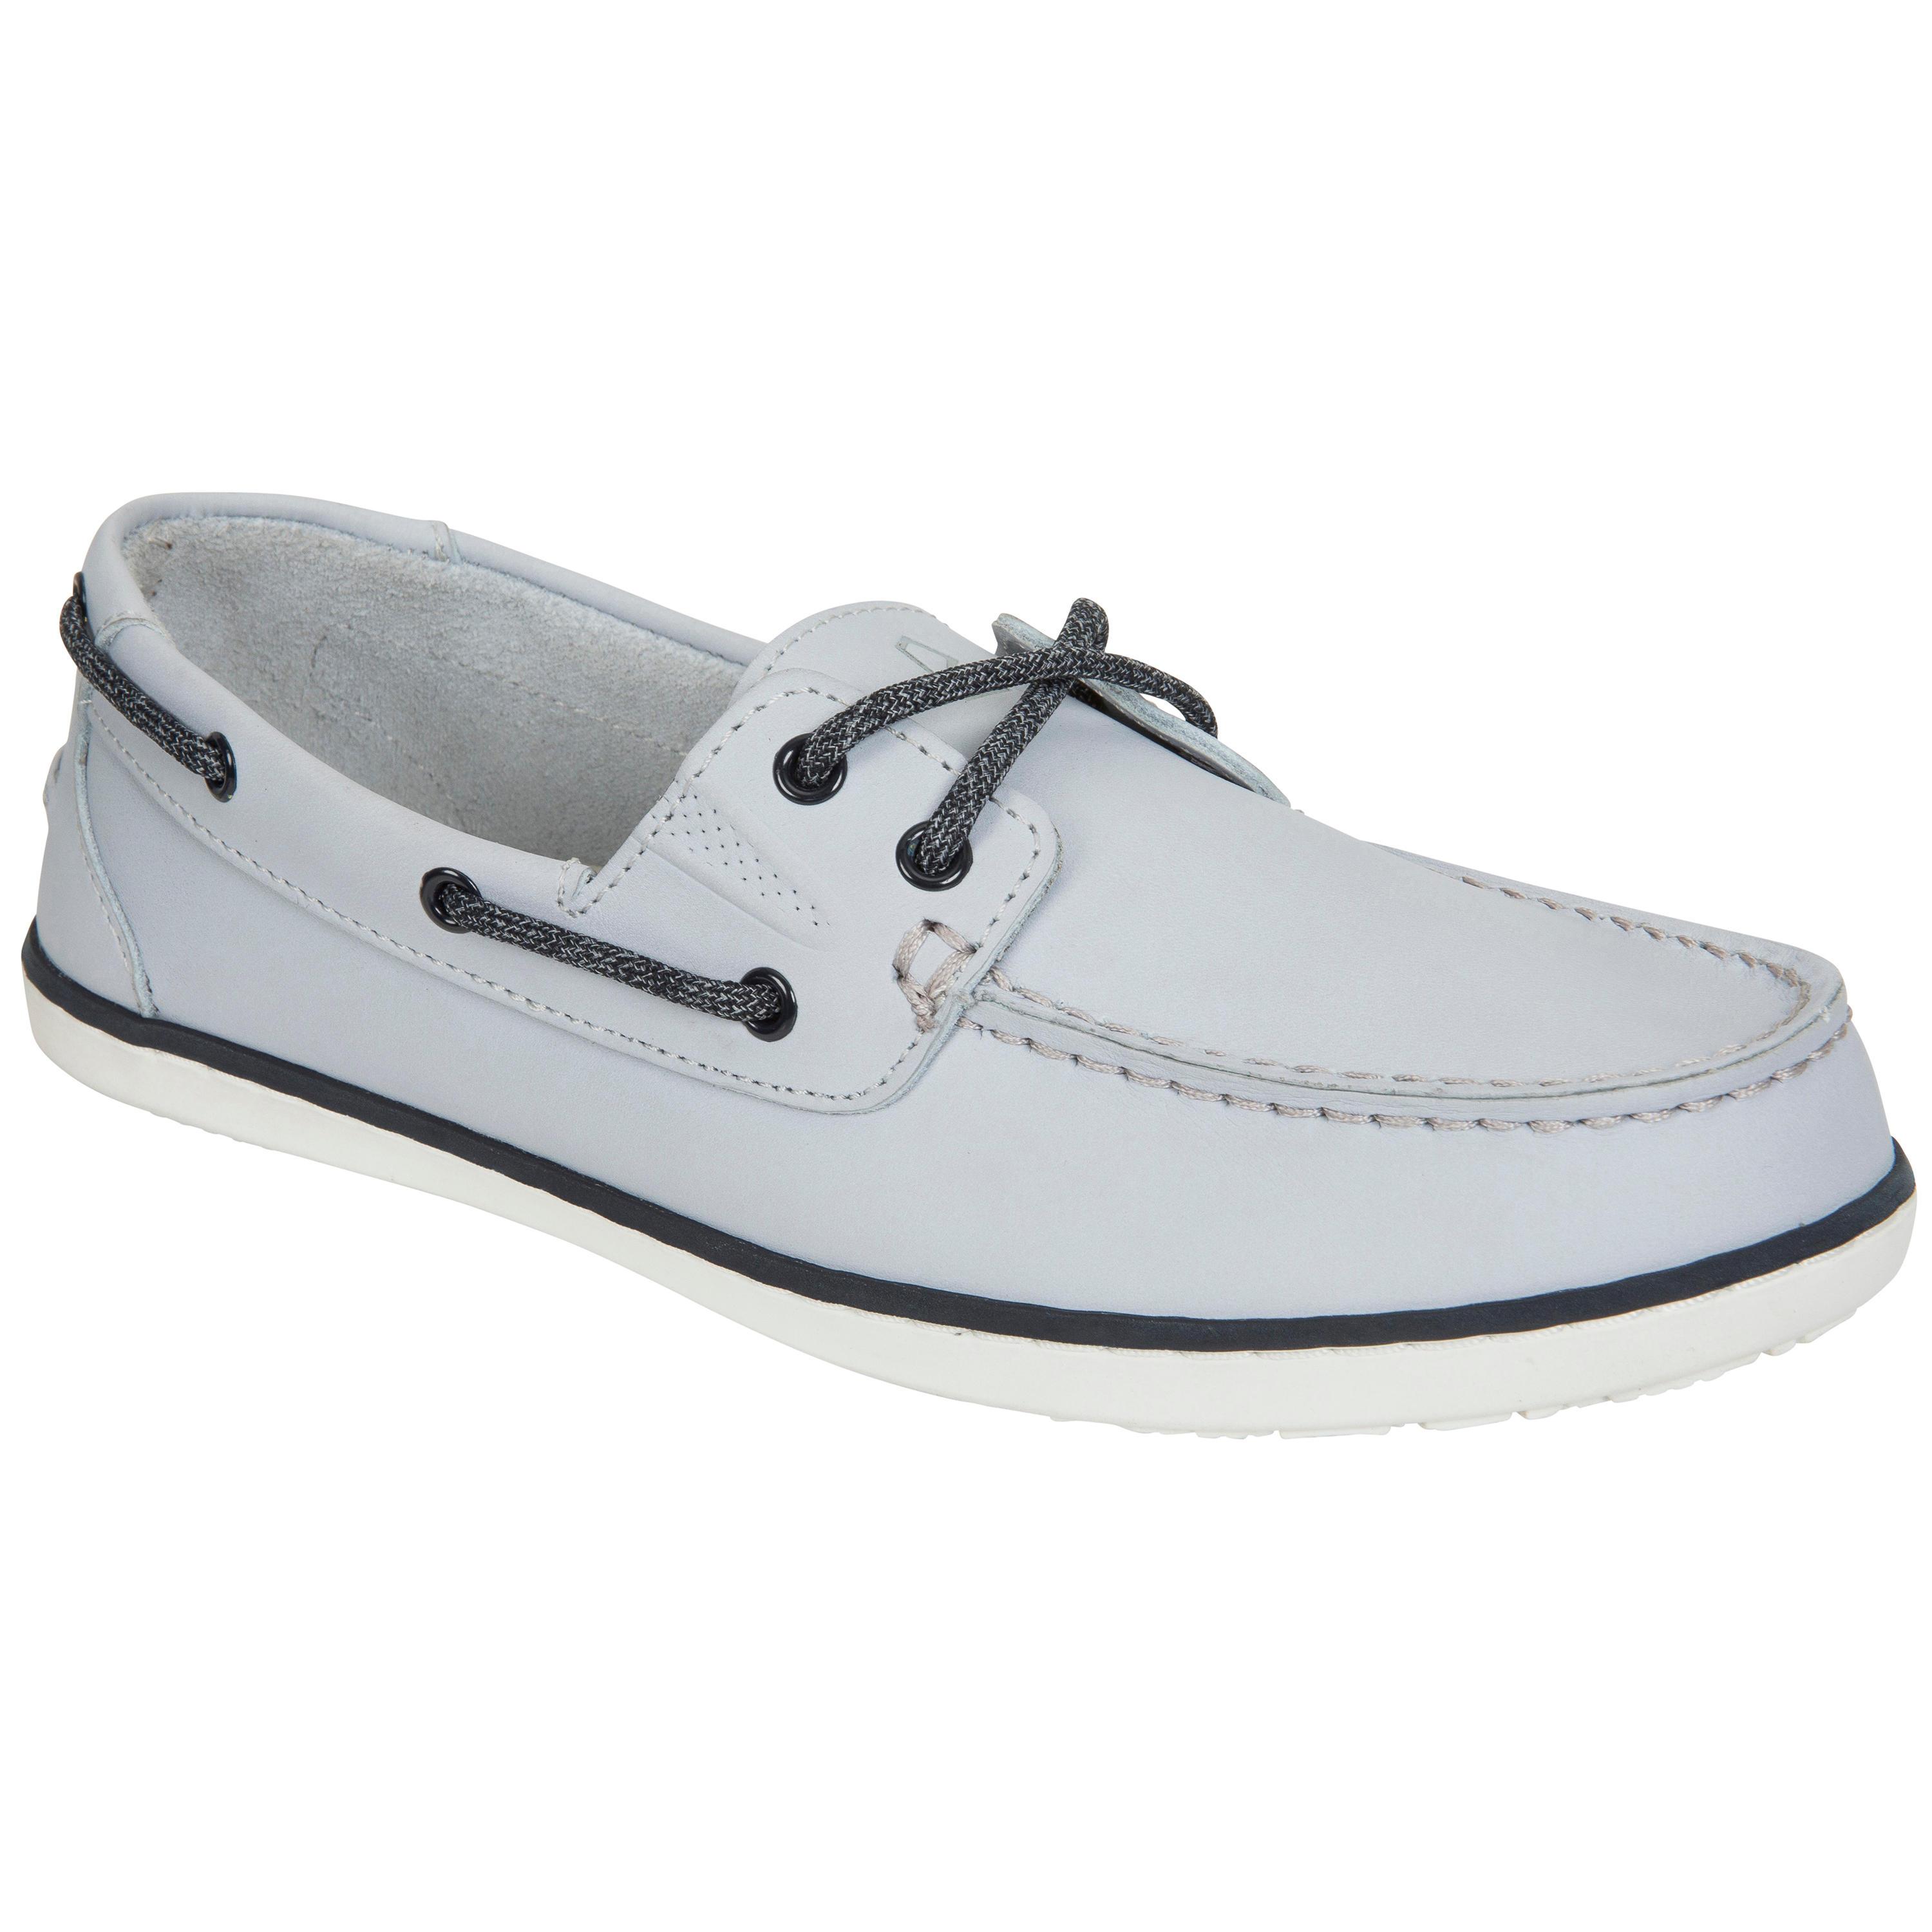 TRIBORD Women’s Leather Sailing Boat Shoes 500 - Grey